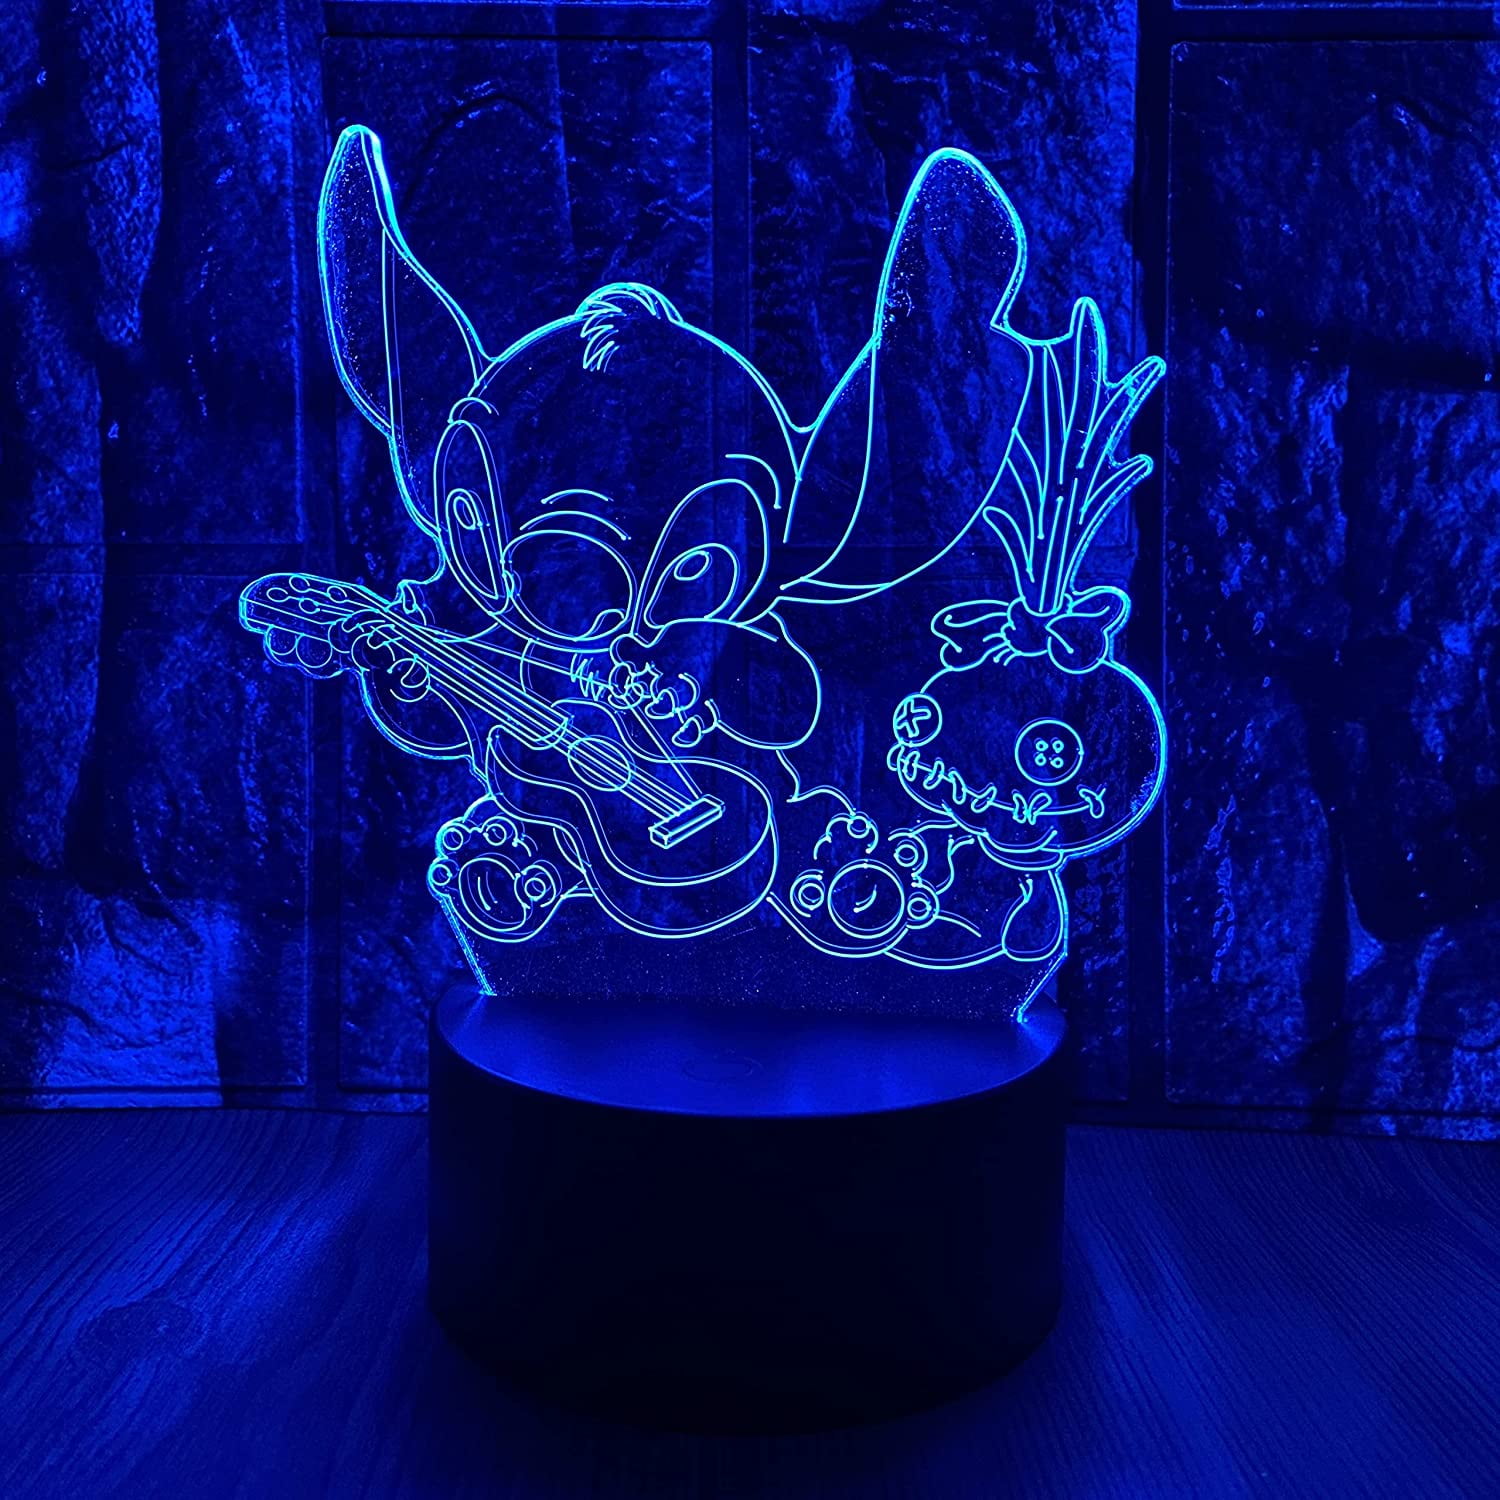 Style 2 for Kids and Friends Lilo and Stitch Digital Alarm with 7 Changing Glowing LED Desktop Clock